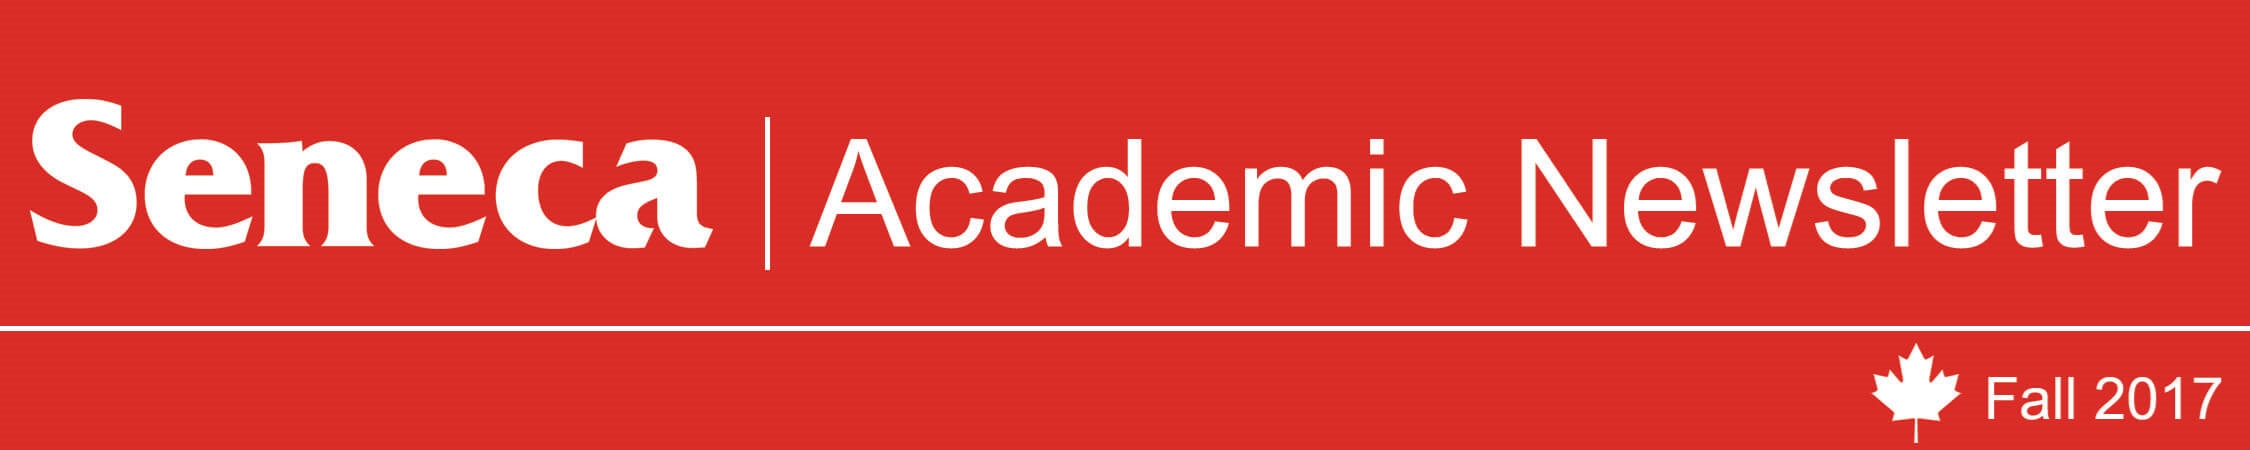 The header logo for the Fall 2017 issue of the Academic Newsletter